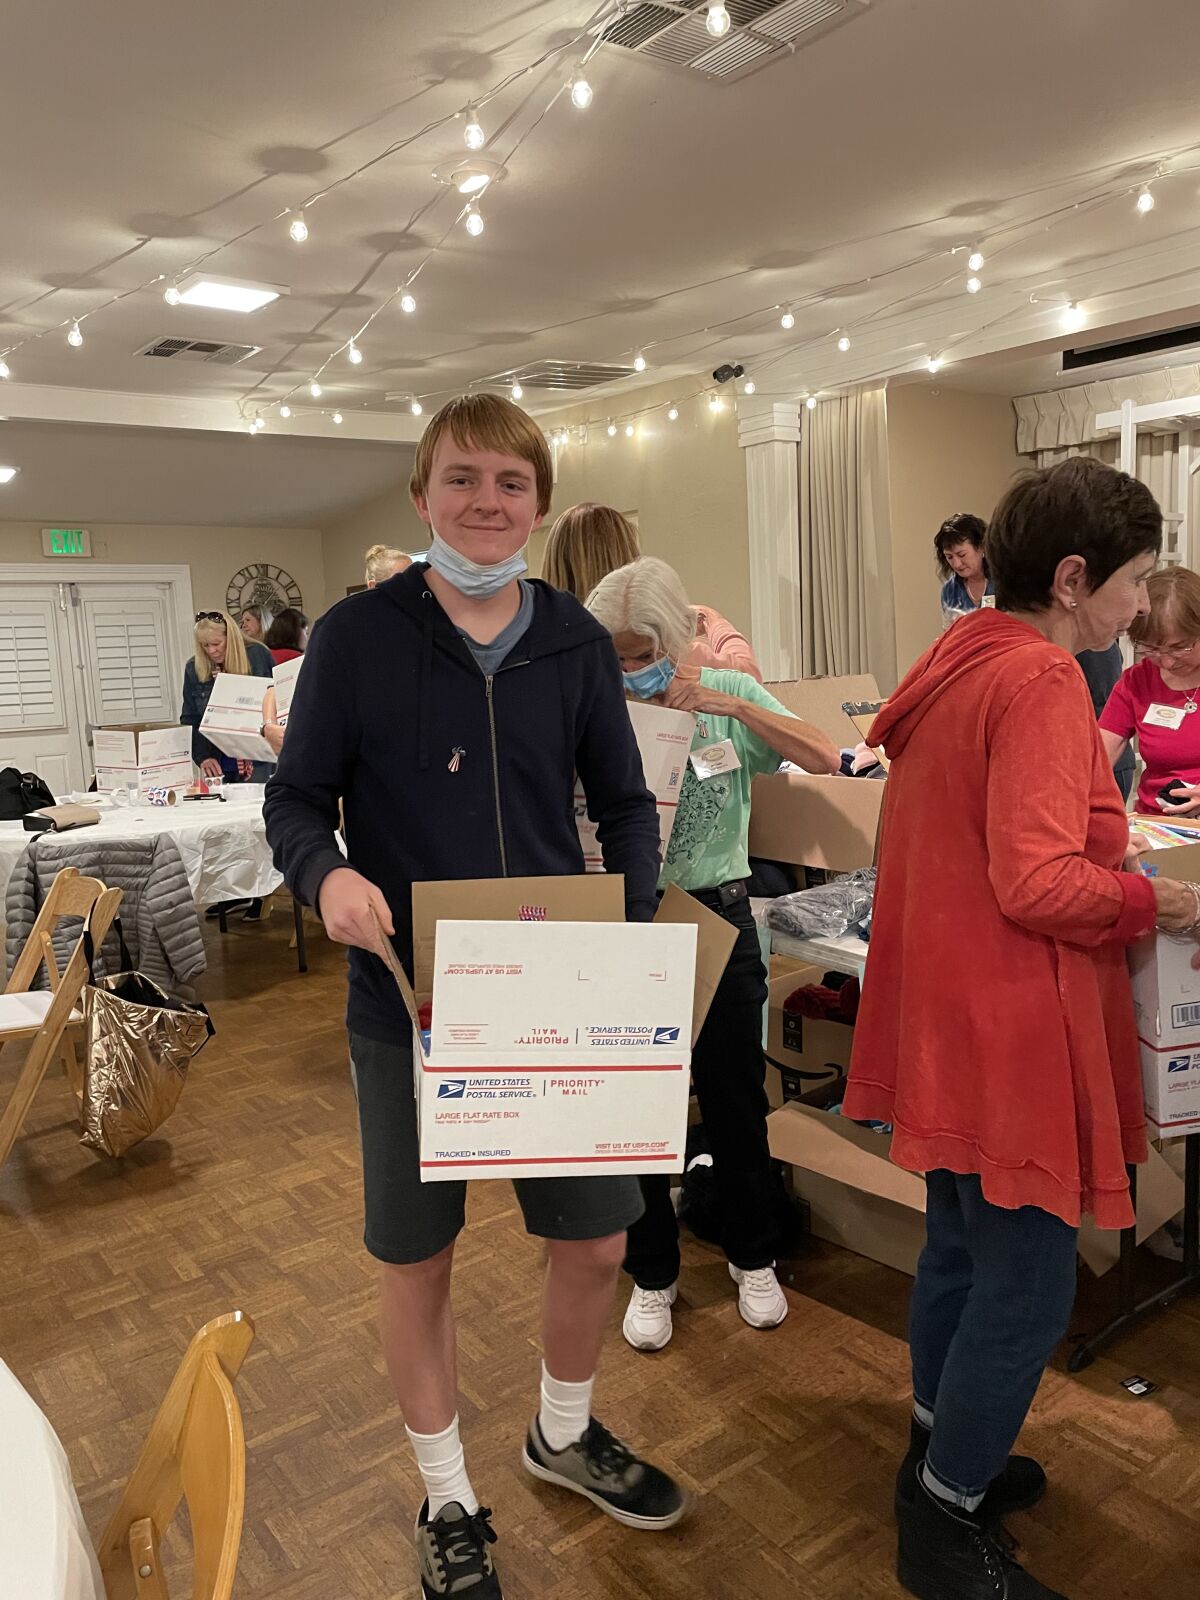 Colin Kavanaugh, a sophomore at The Bishop's School, holds a box he helped pack with items for women in the armed forces.